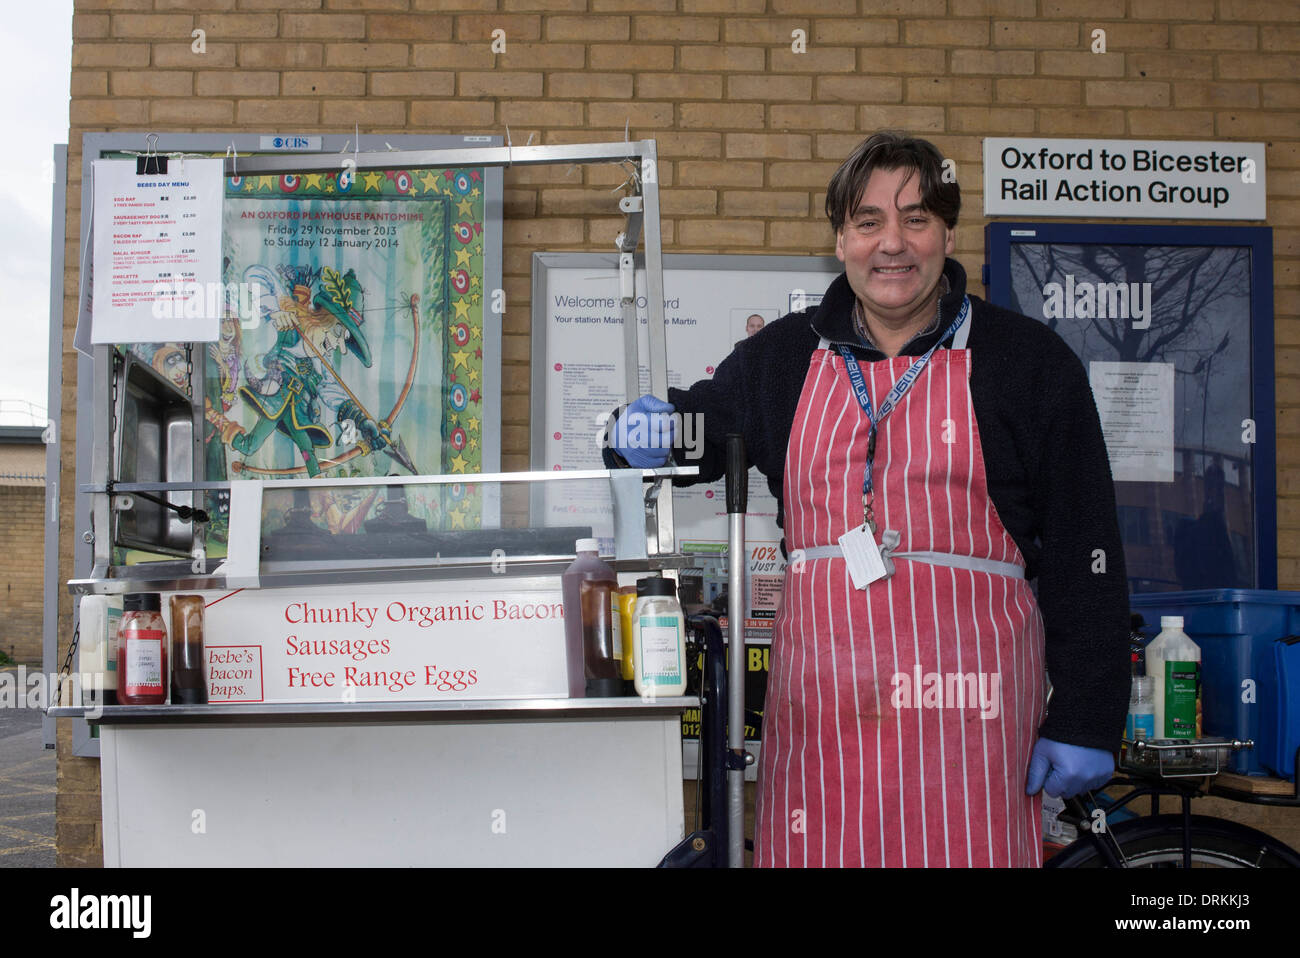 Smiling middle aged man selling organic fast food from hotplate on bicycle at Oxford, UK, railway station Stock Photo